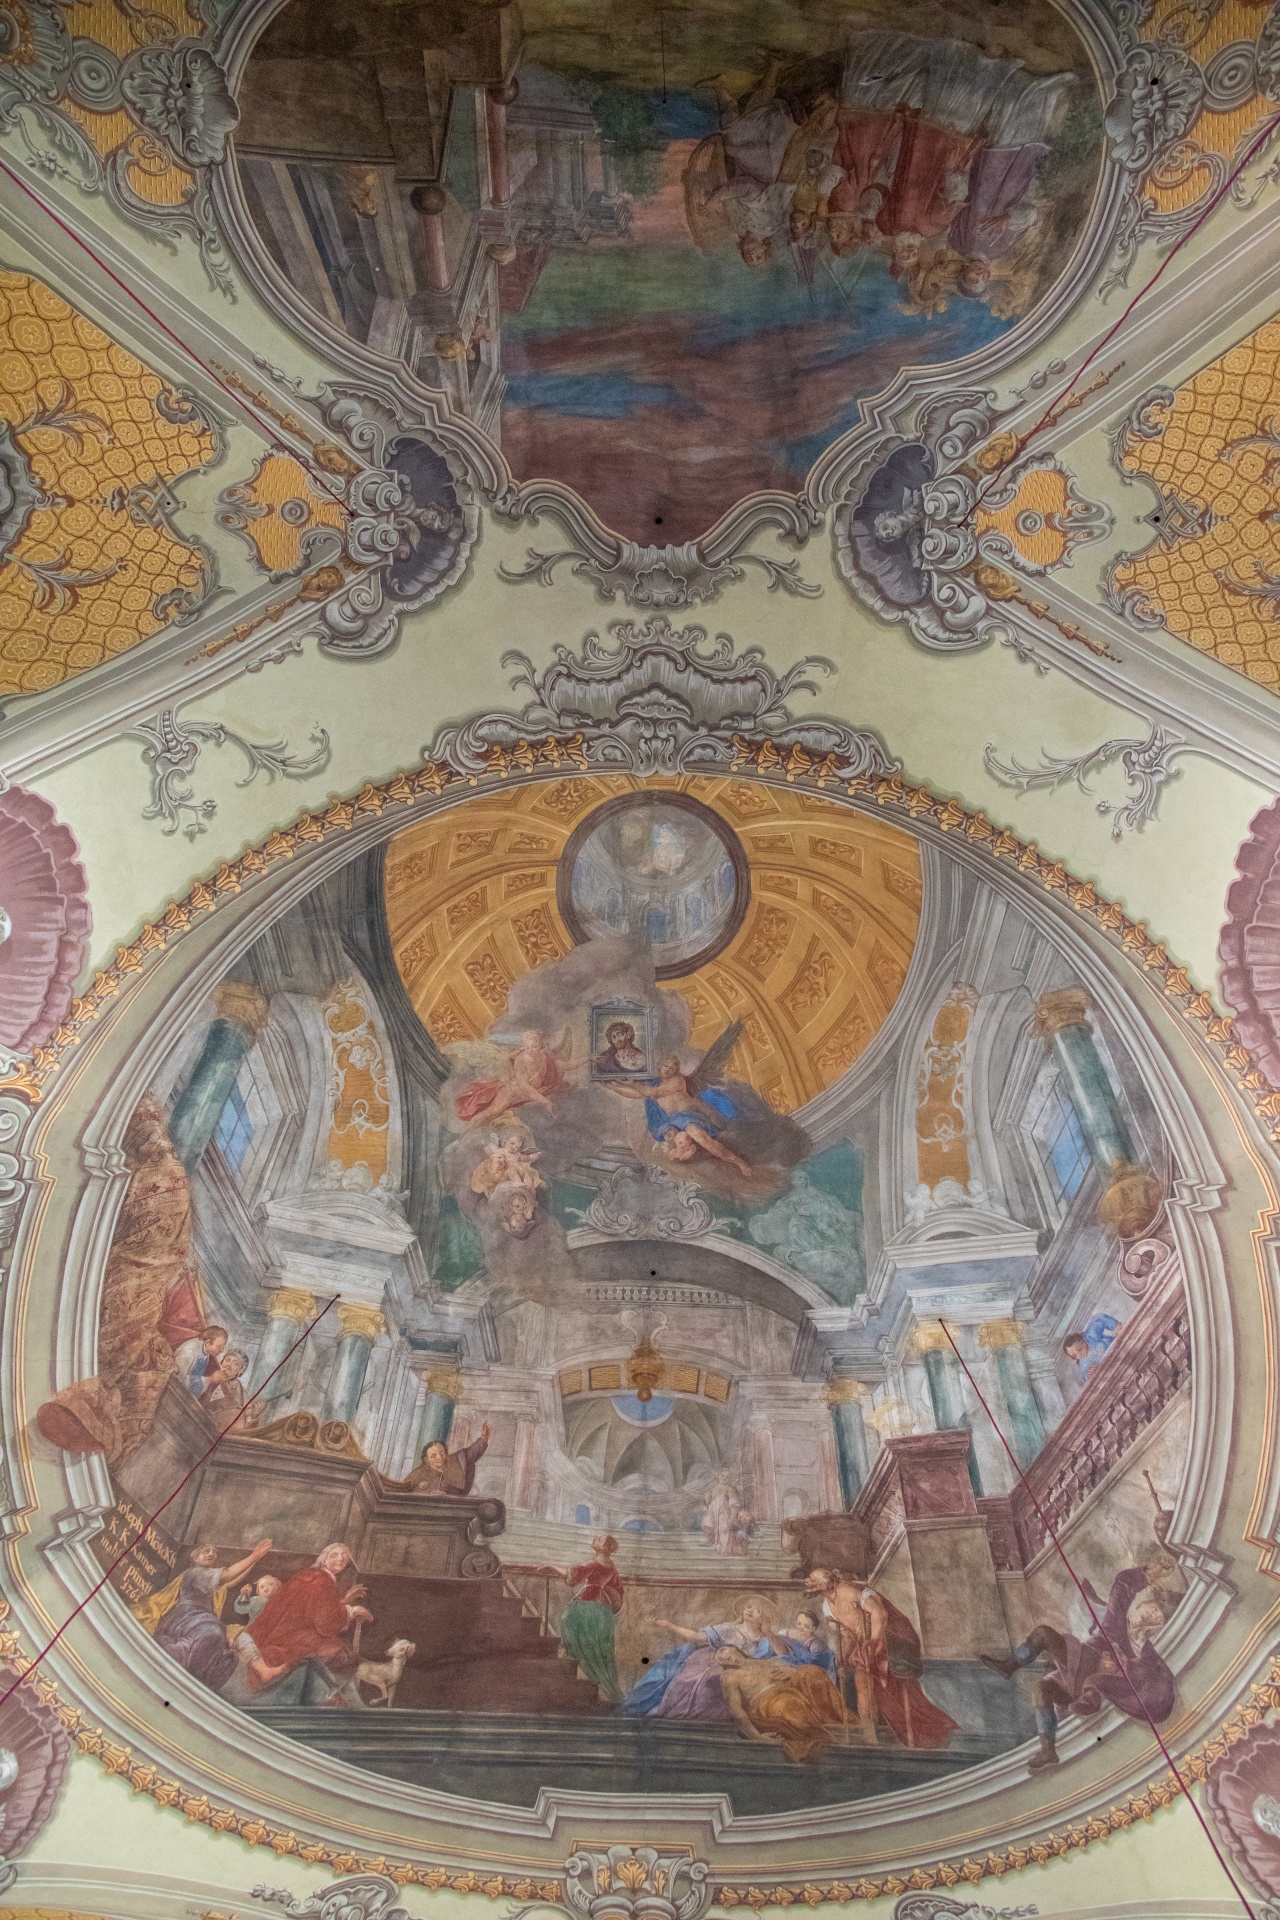 Decorated ceiling in a church